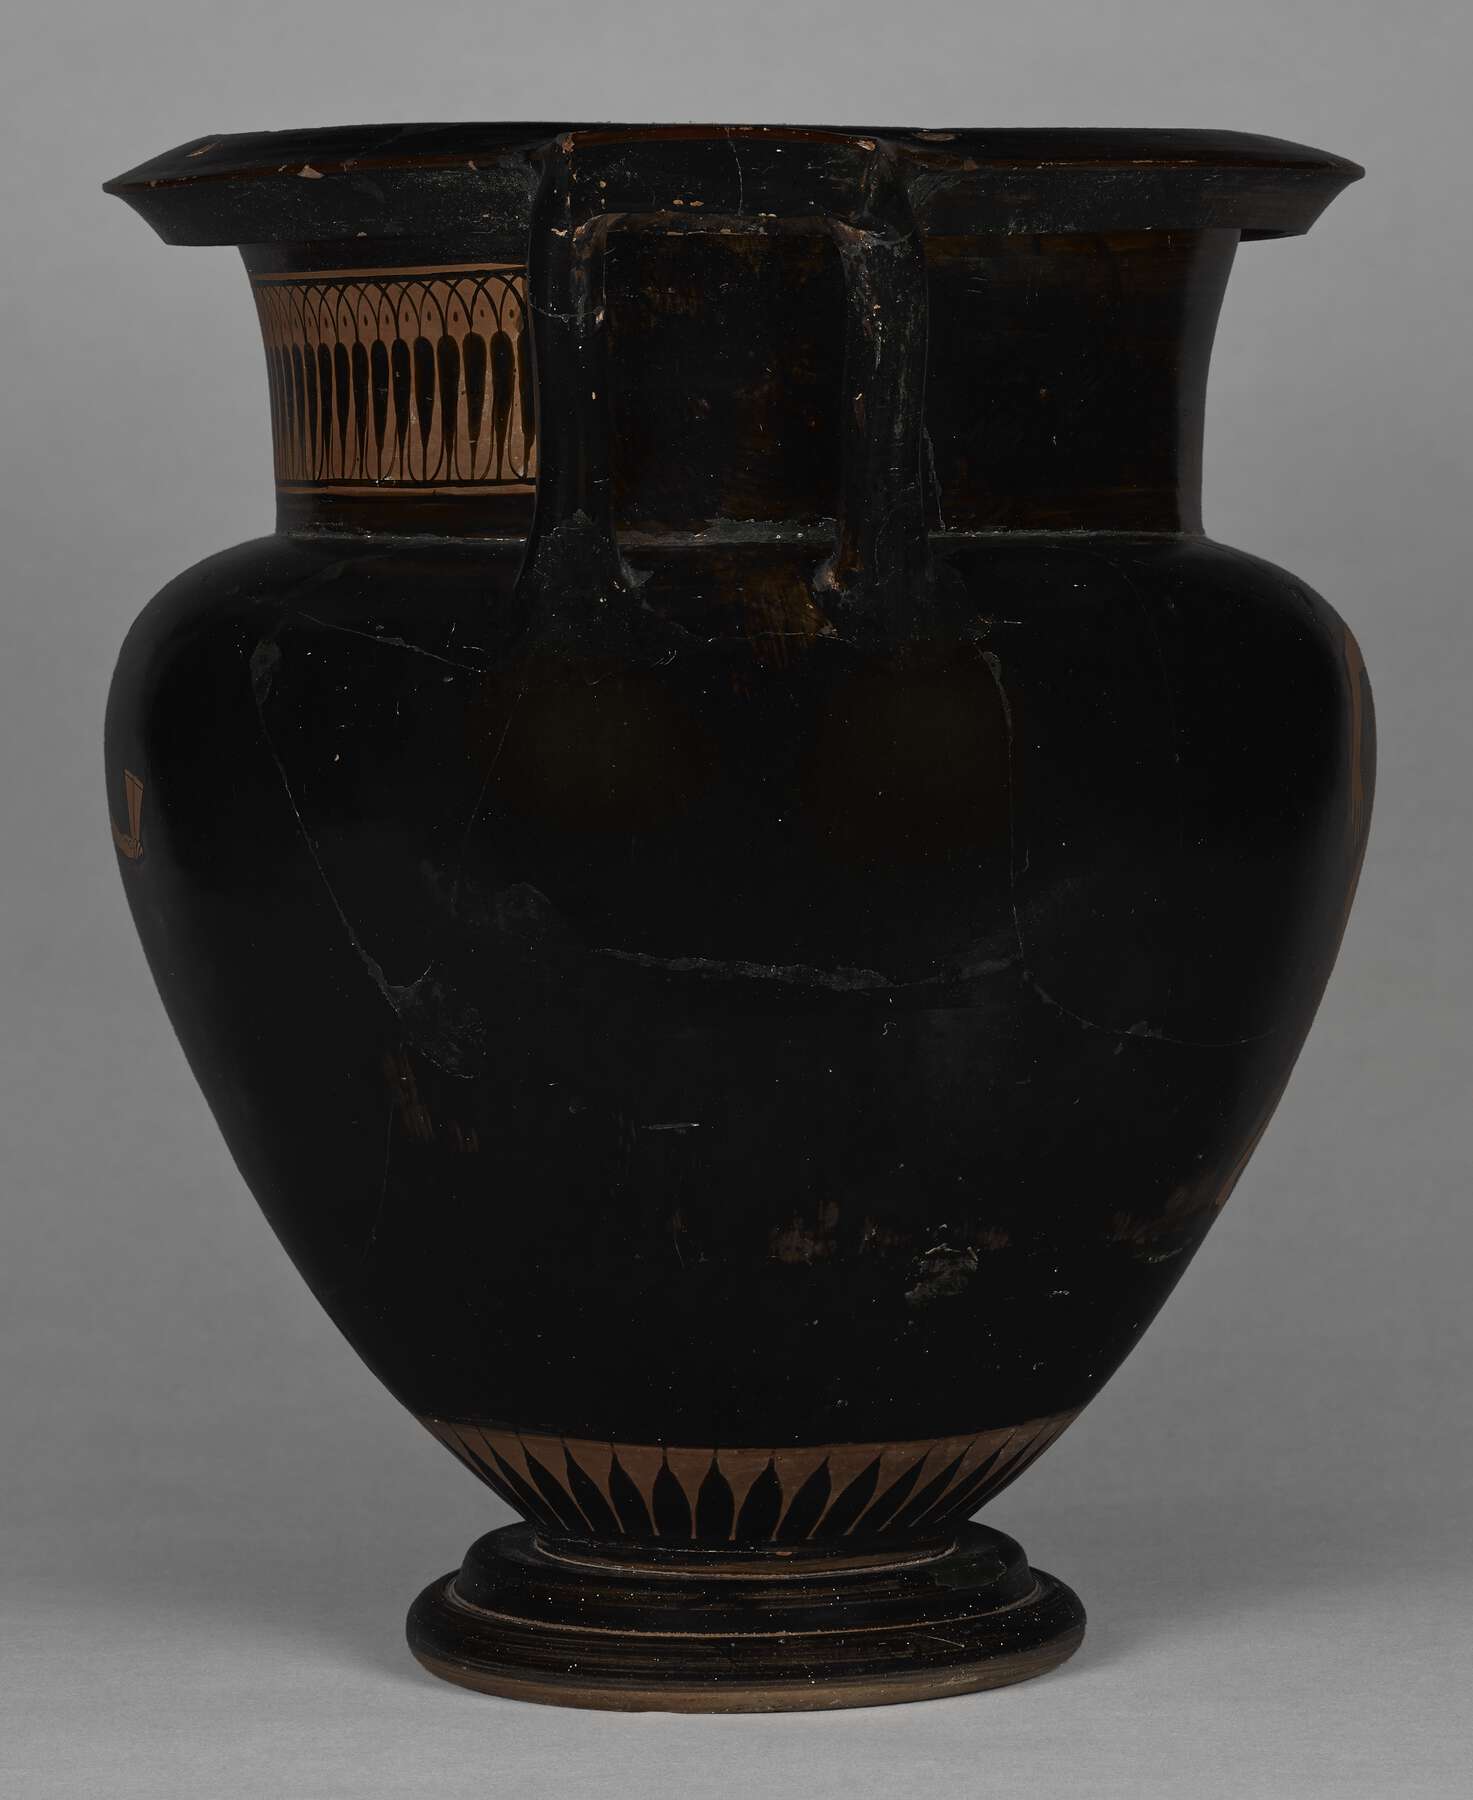 The other side of the vase, showing some decoration on the left side of the neck and along the base of the body, but not showing the figures (almost all black)